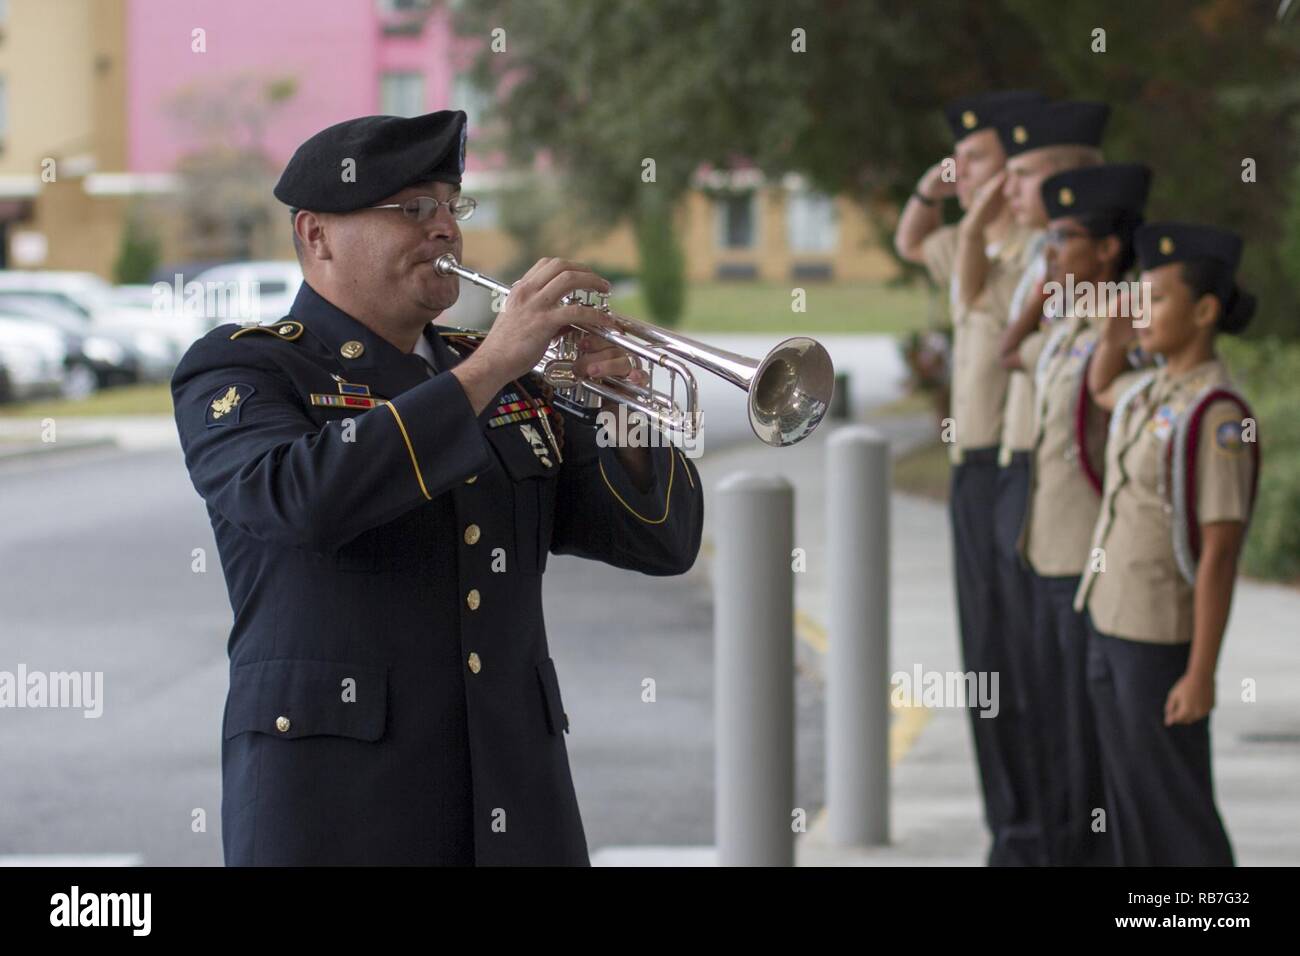 After a 21-gun salute, Spc. Matthew Rodriguez, bugler, 3rd Infantry Division Band plays taps honoring the fallen veterans during a remembrance ceremony at the National Museum of the Mighty Eighth Air Force in Pooler, Georgia December 4. U.S. Army Stock Photo